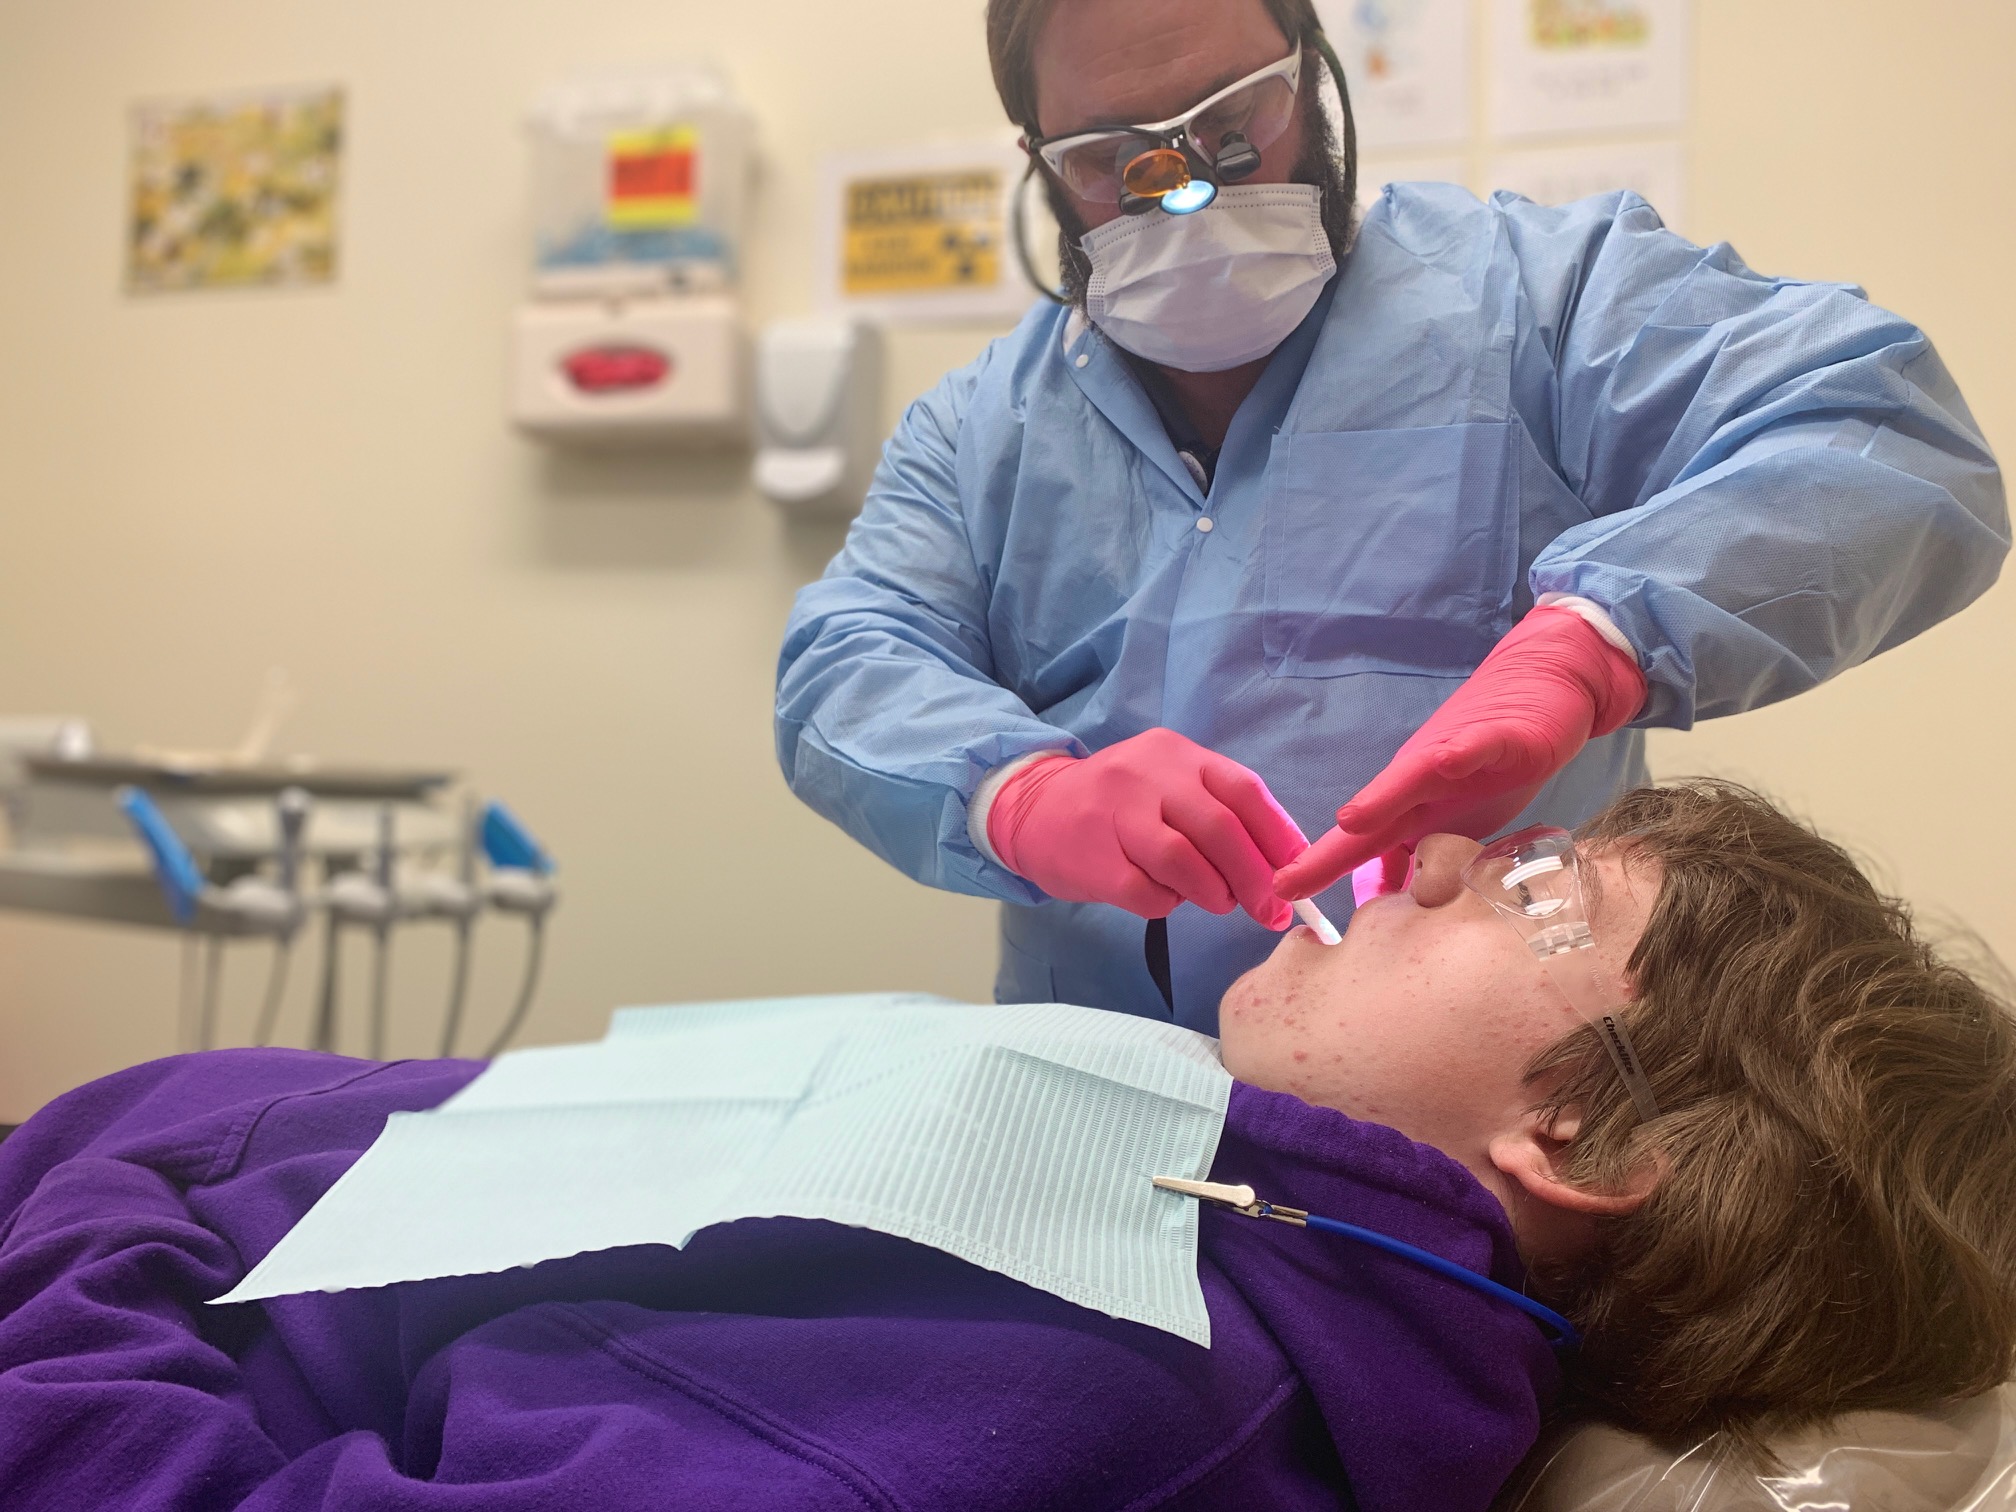 dentist examining child patient's mouth